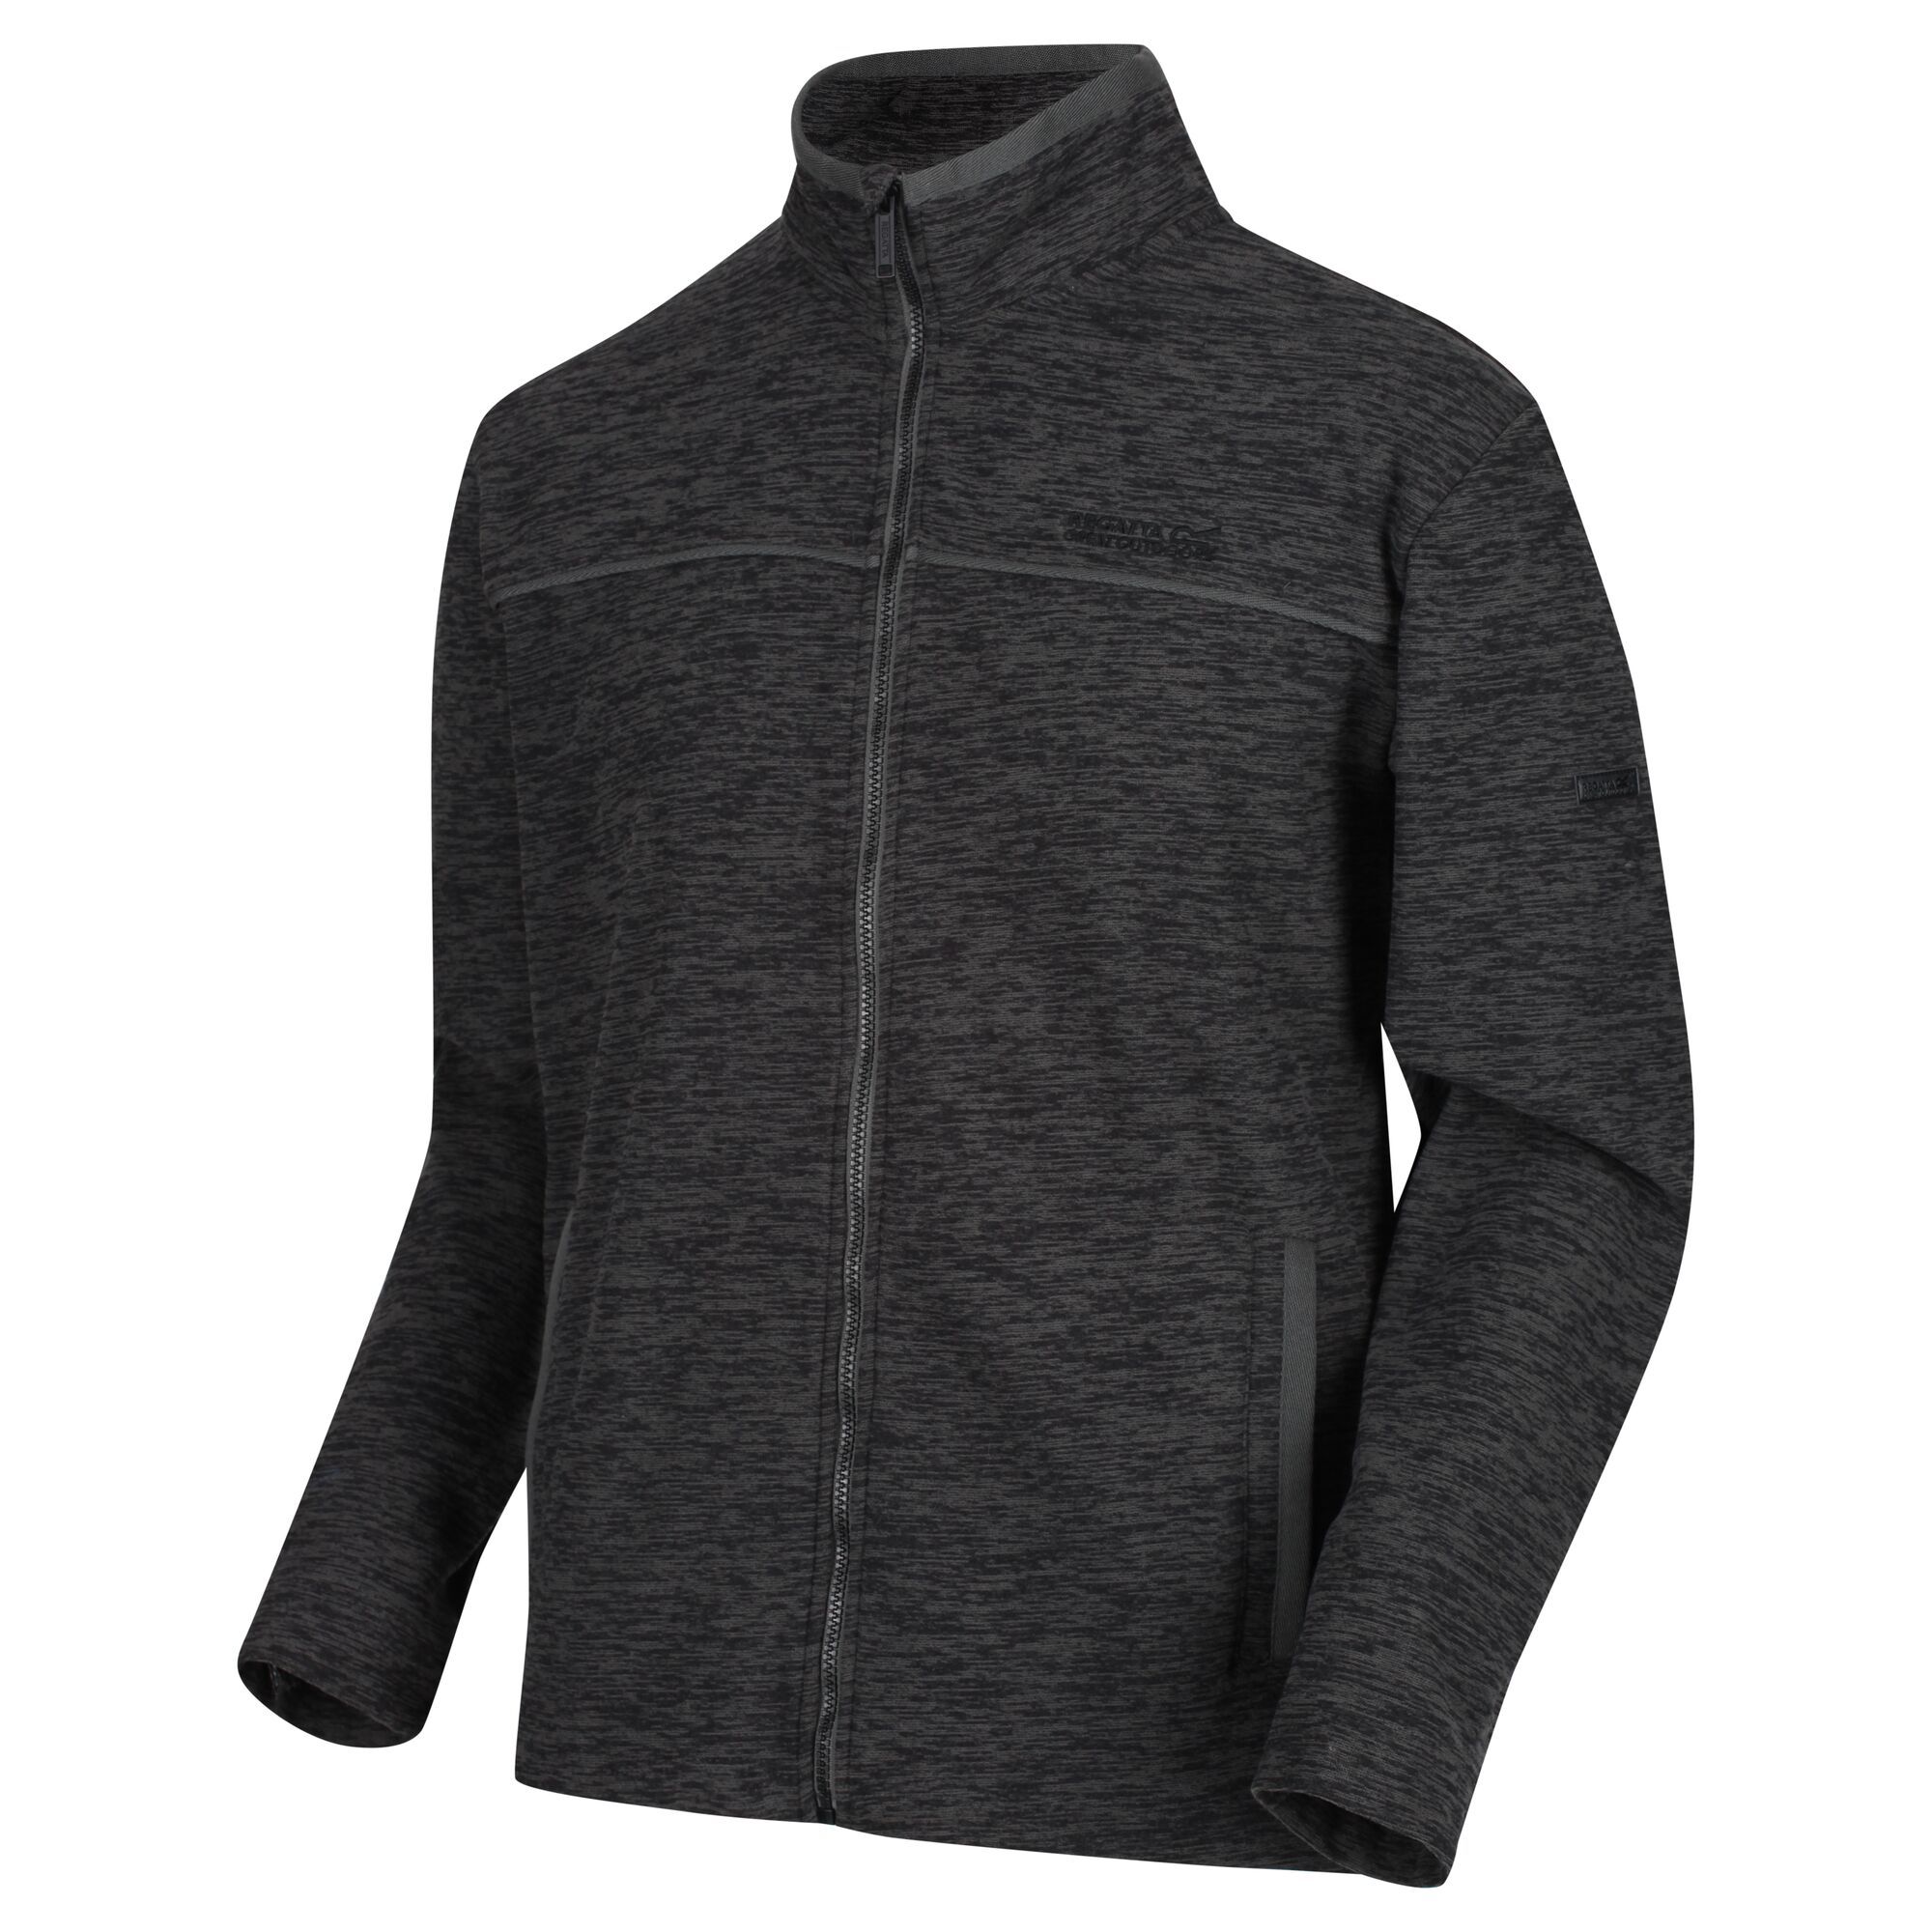 Material: polyester: 100%. 280 grams 100% polyester grid fleece. Inner zip guard. 2 lower pockets. Adjustable shockcord hem. Regatta outdoors badge on the left sleeve. Wear it to bulk up your deep winter layers or as a jacket on milder days.